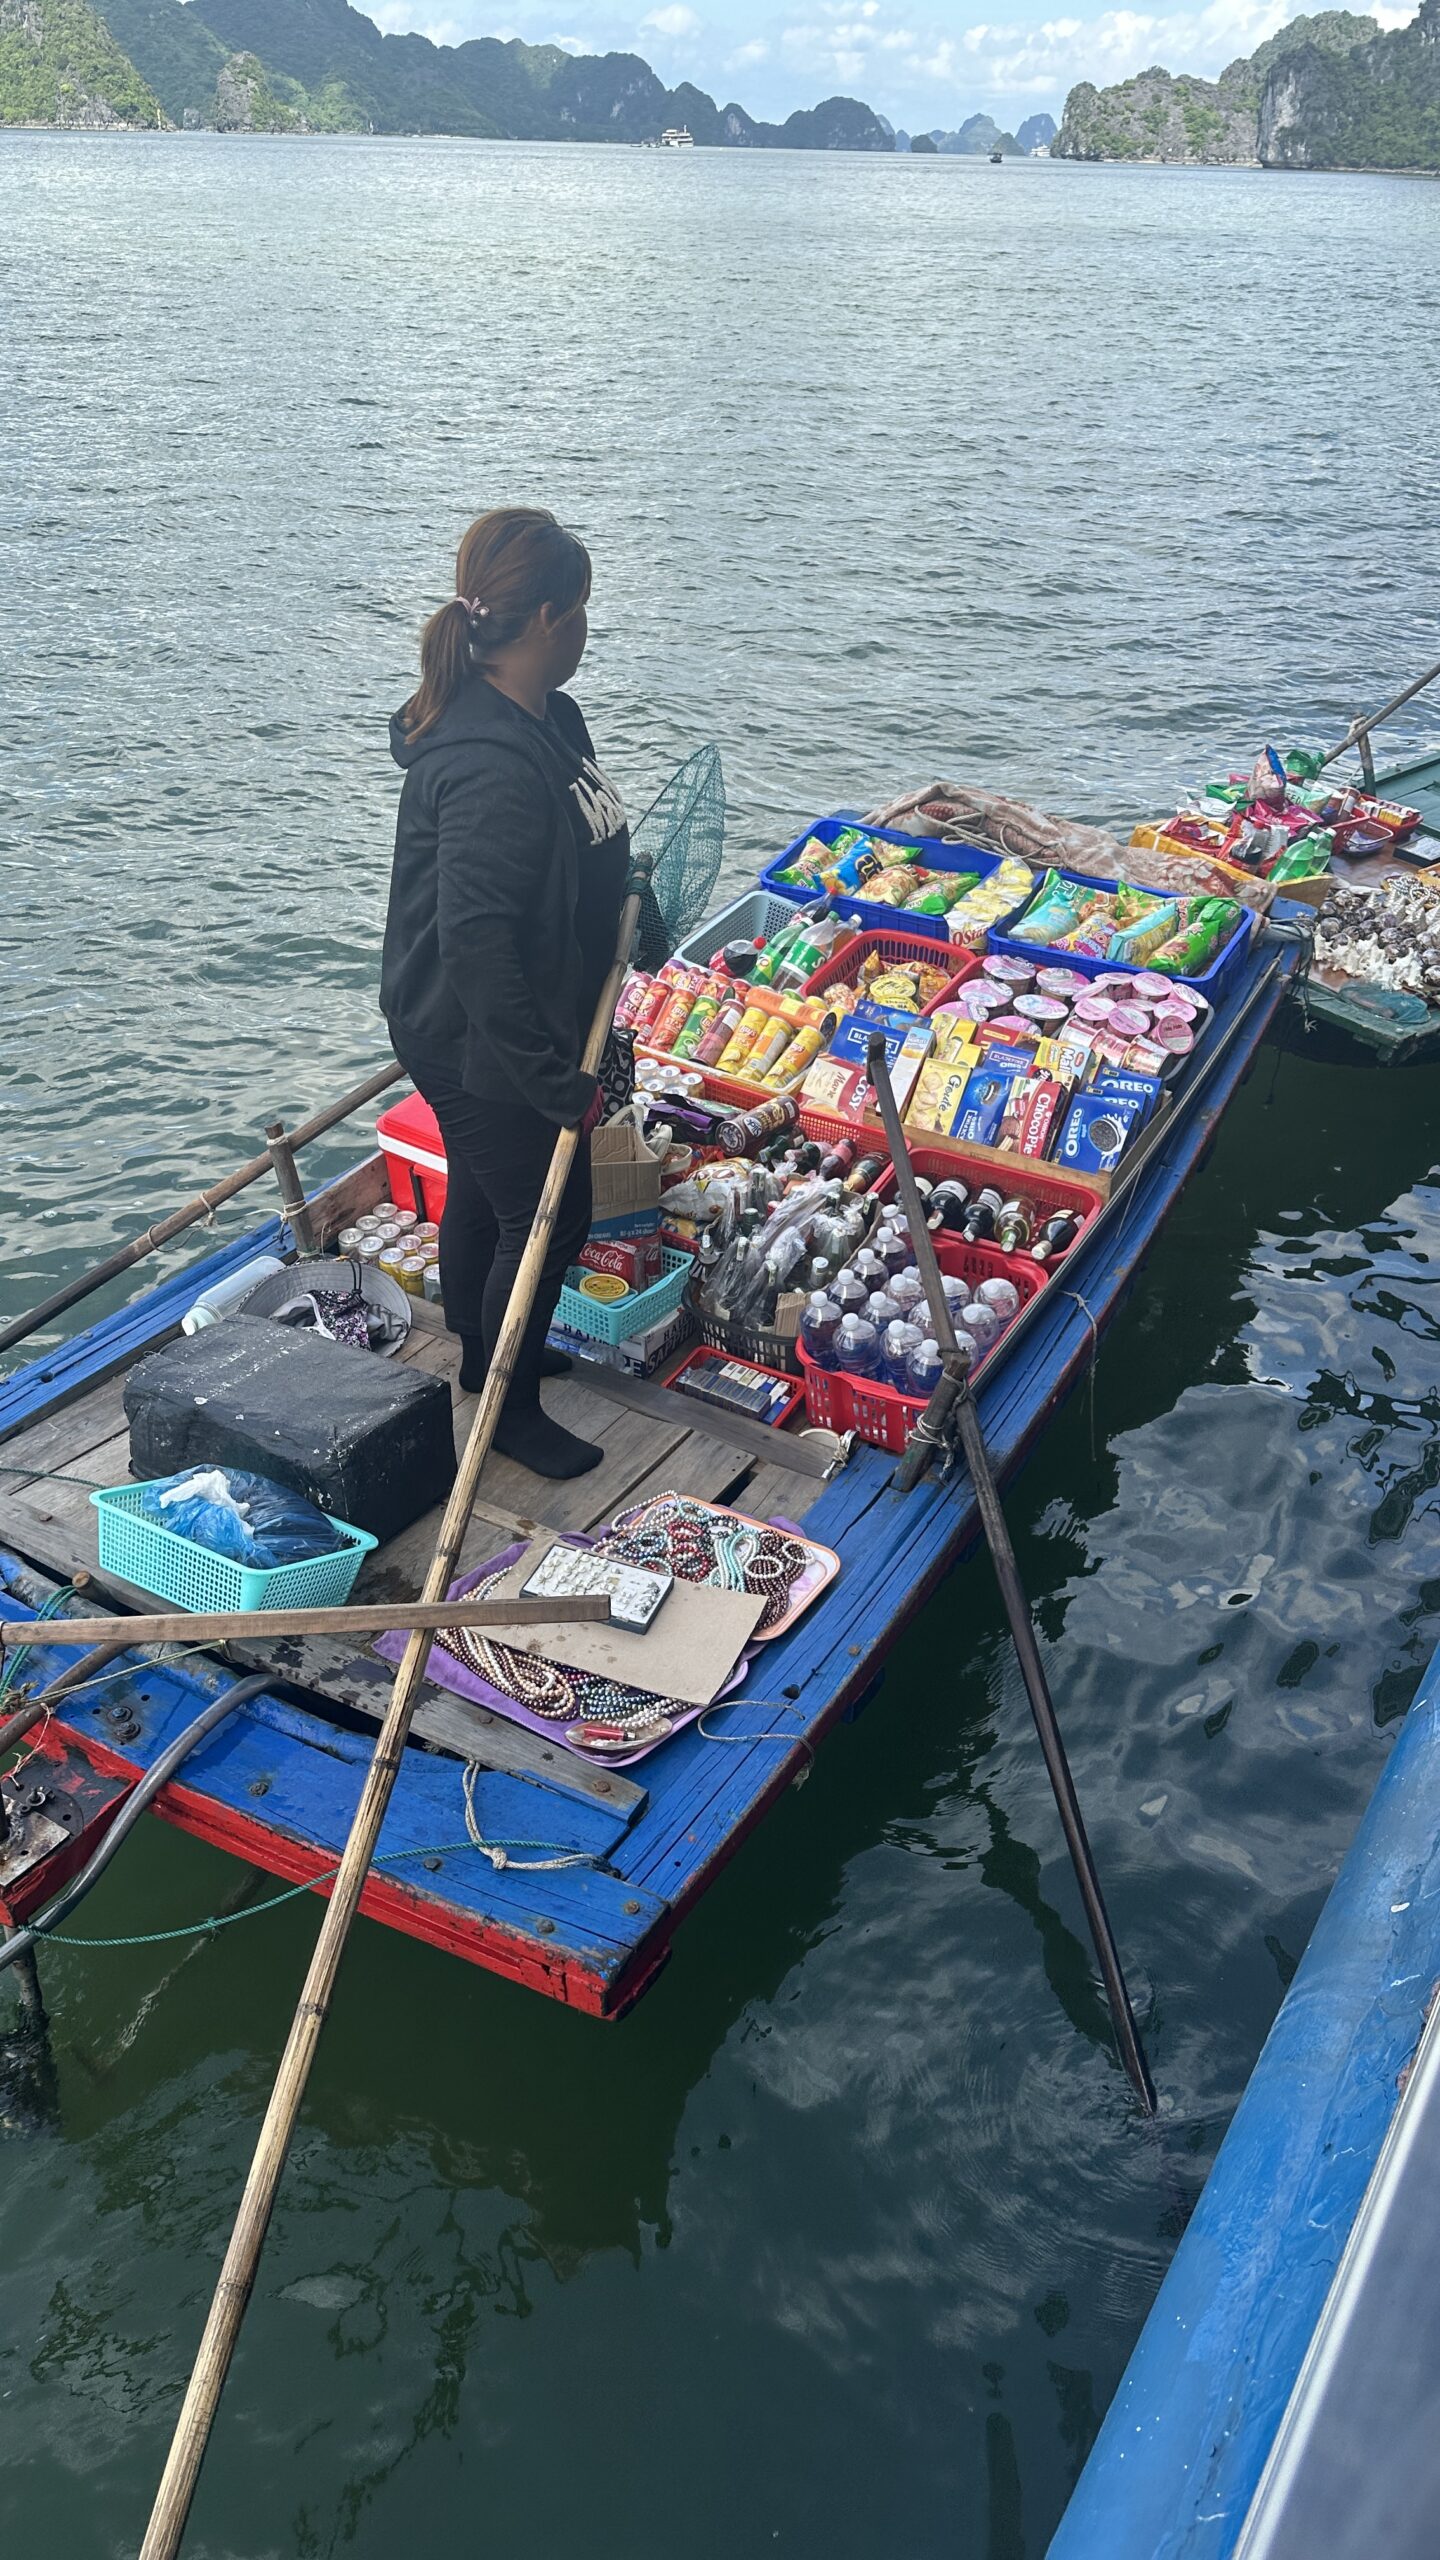 Image of a Convenience store on a boat, offering a variety of goods to tourists in Ha Long Bay.